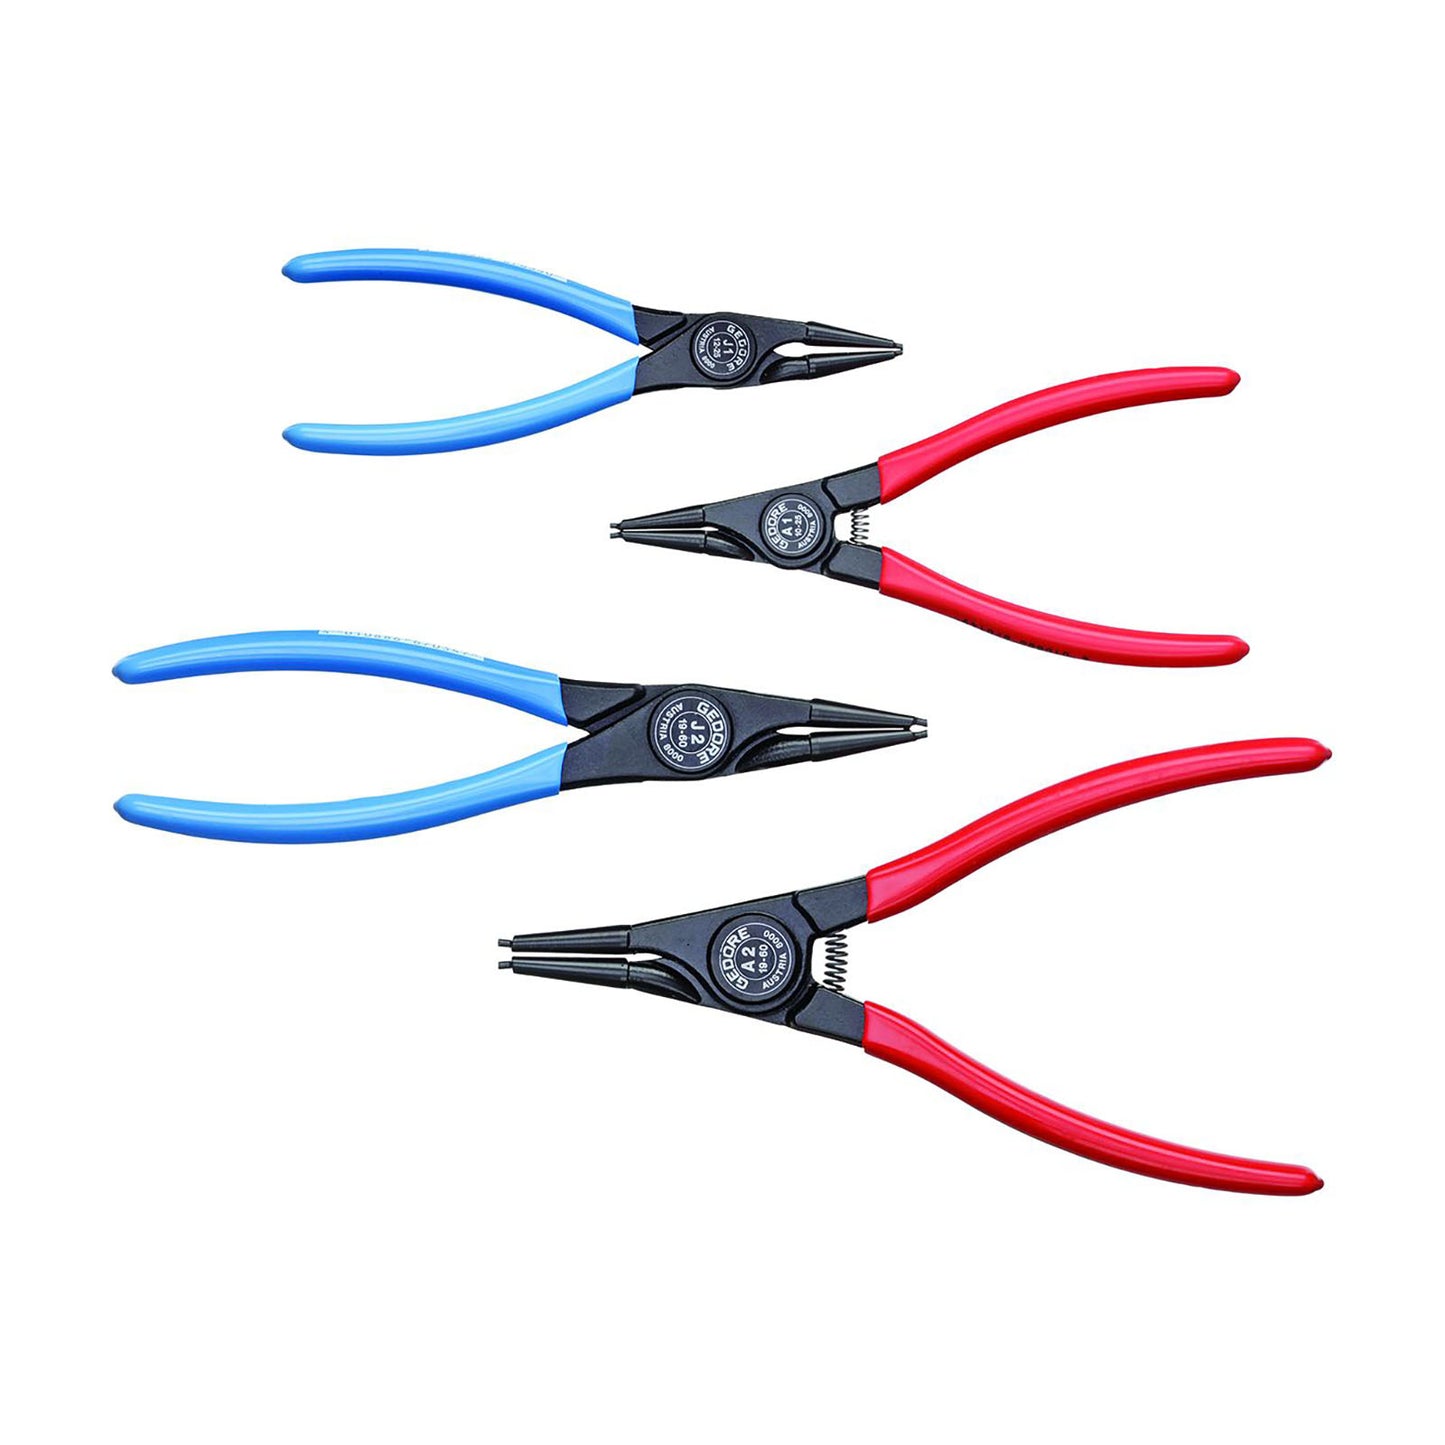 GEDORE S 8100 - Assortment of 4 Circlip Pliers (6703080)